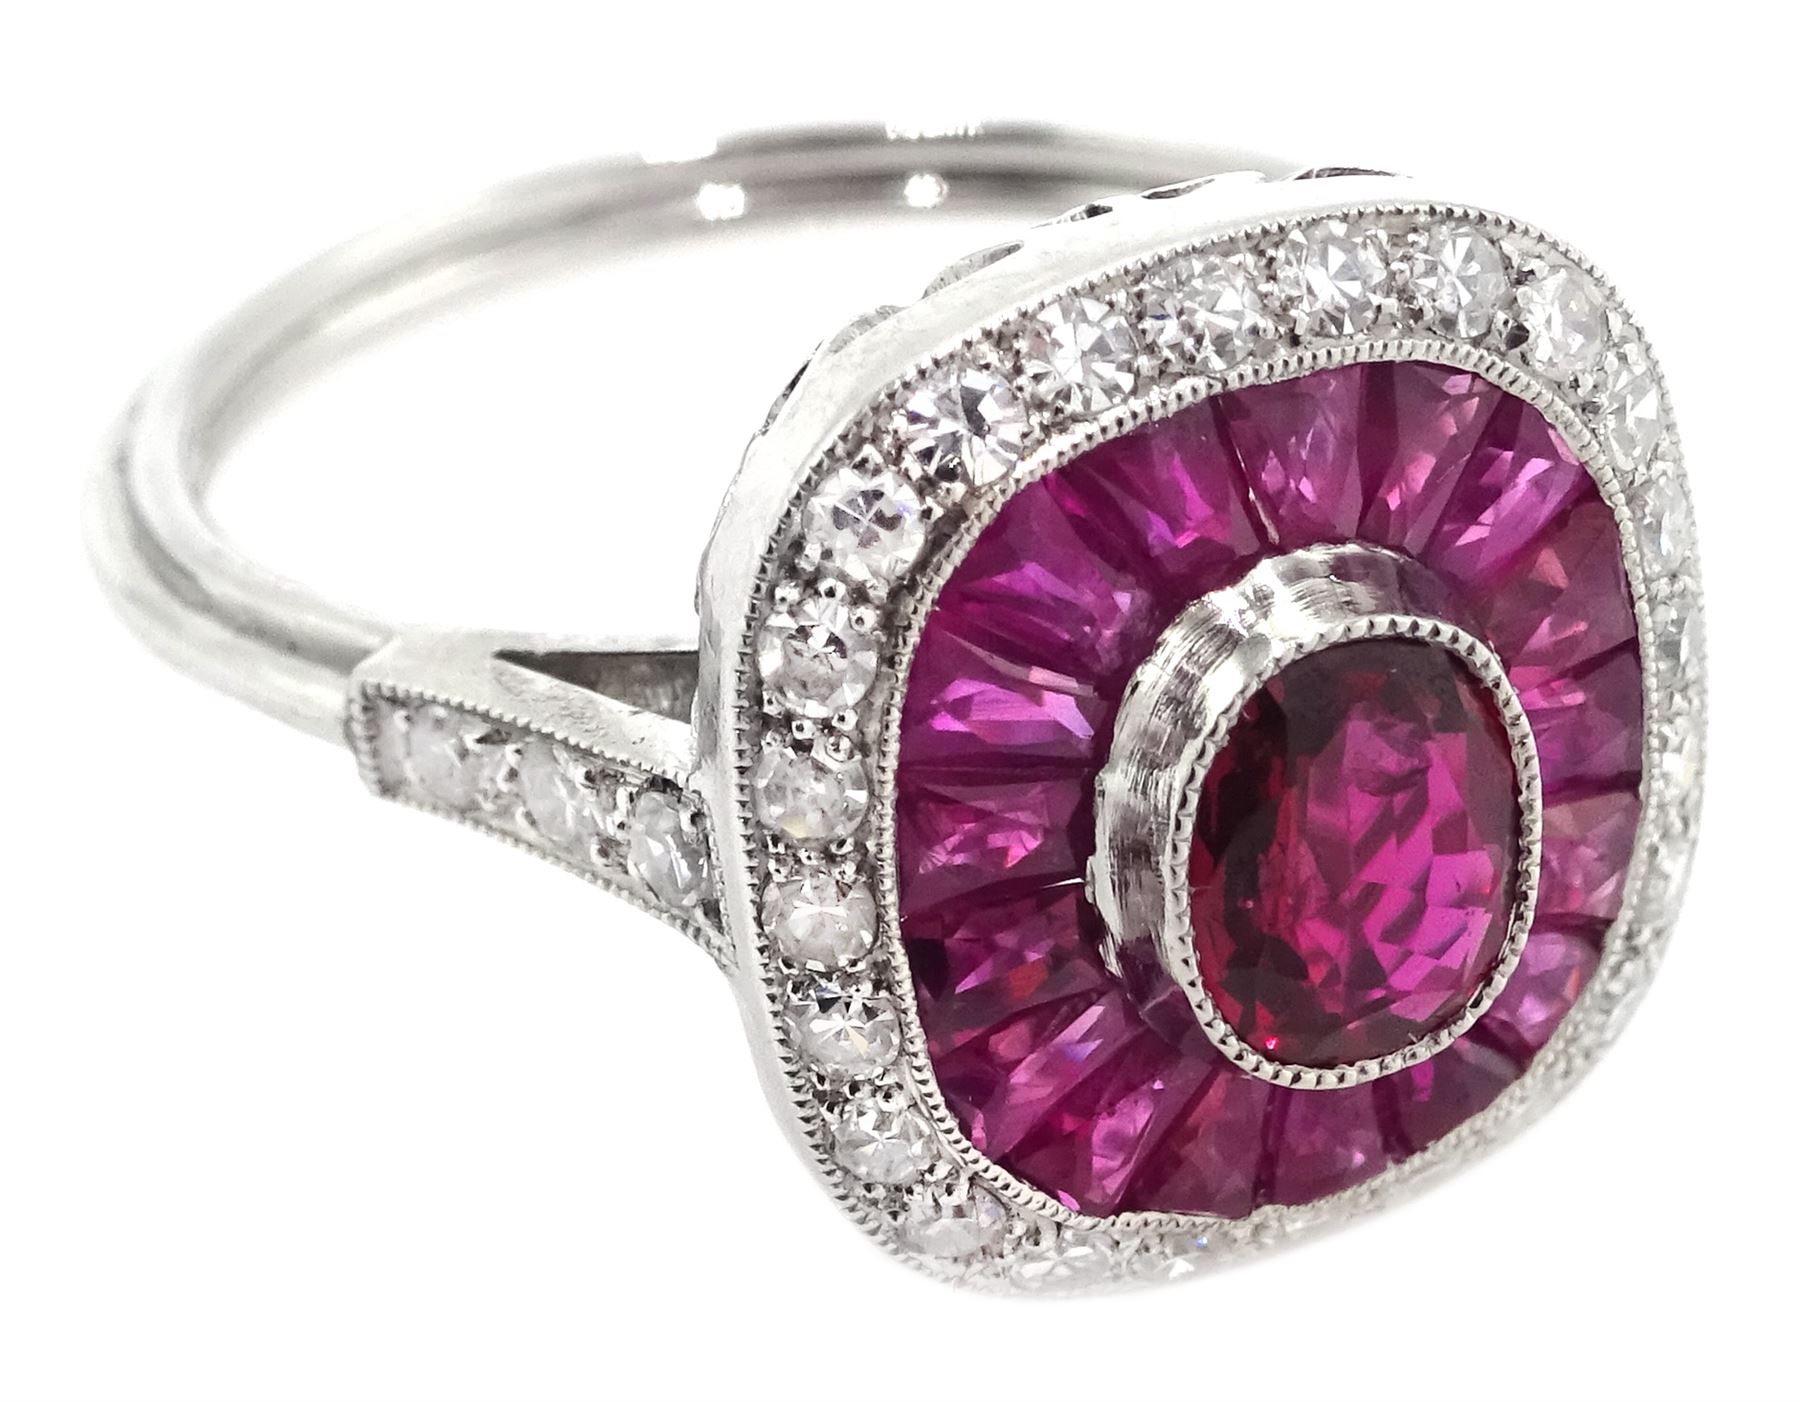 Platinum ring set with central oval ruby - Image 2 of 4